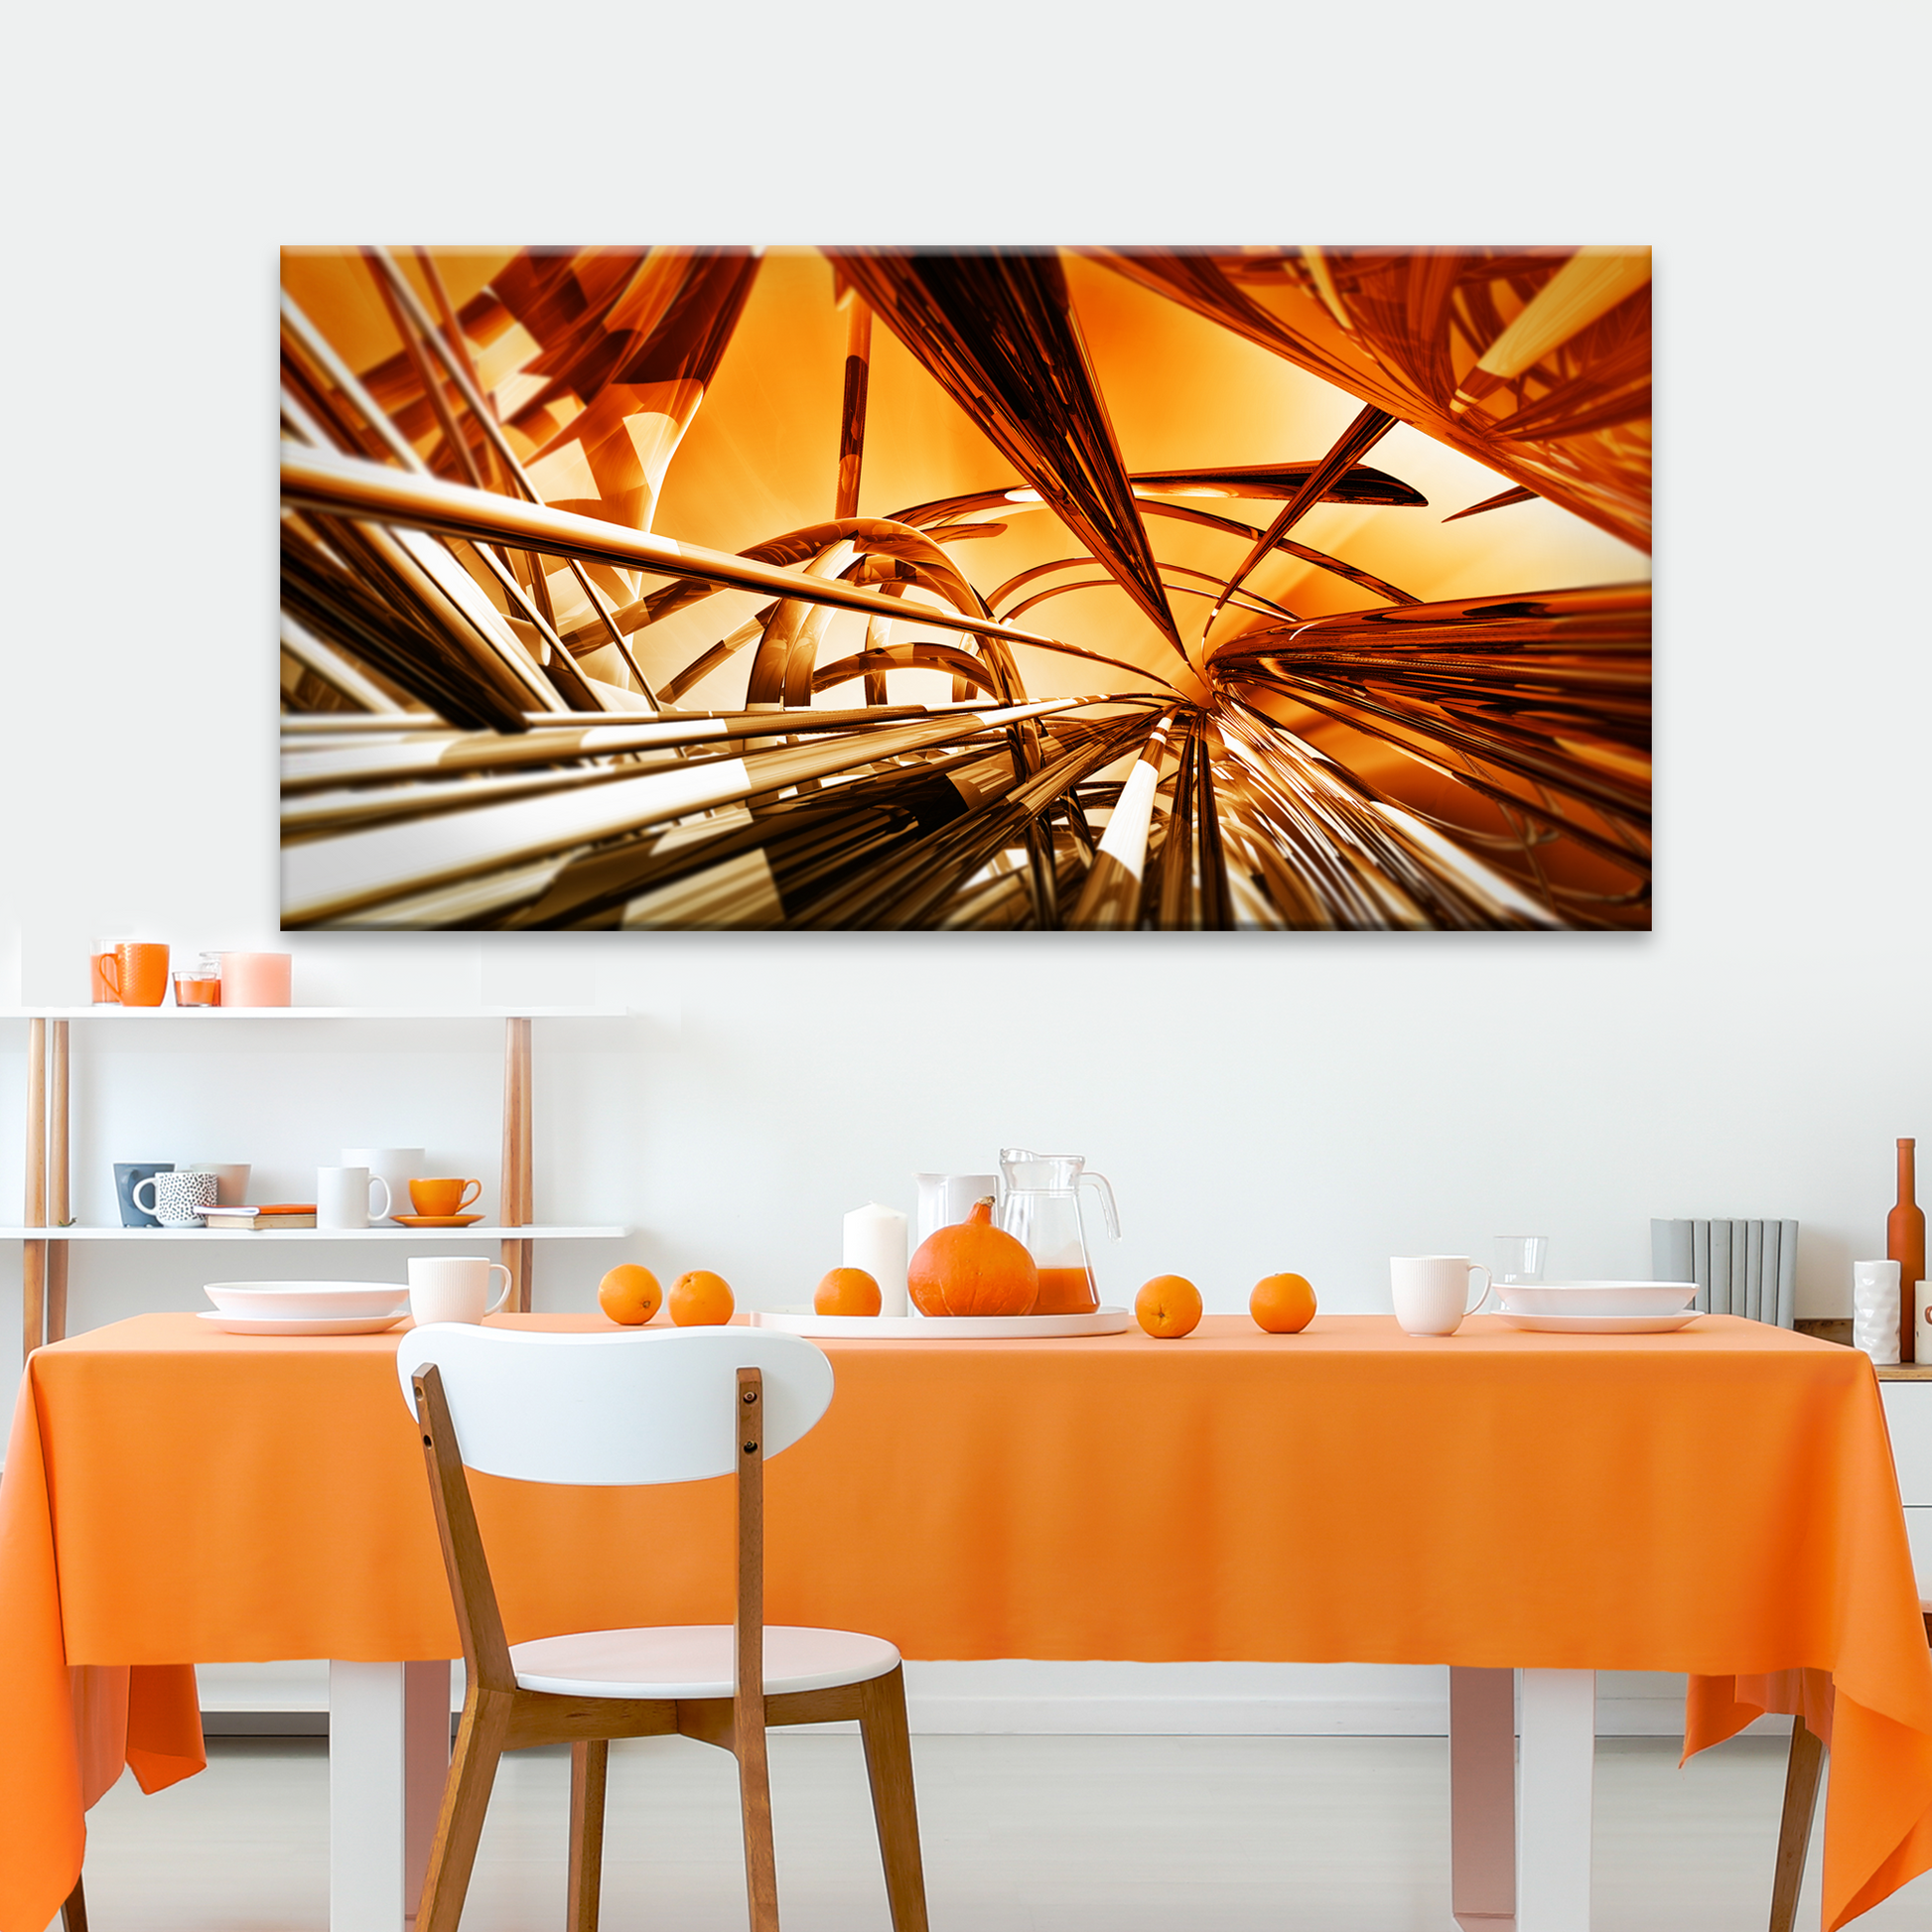 3D Gold Metallic Lines - Image by Tailored Canvases